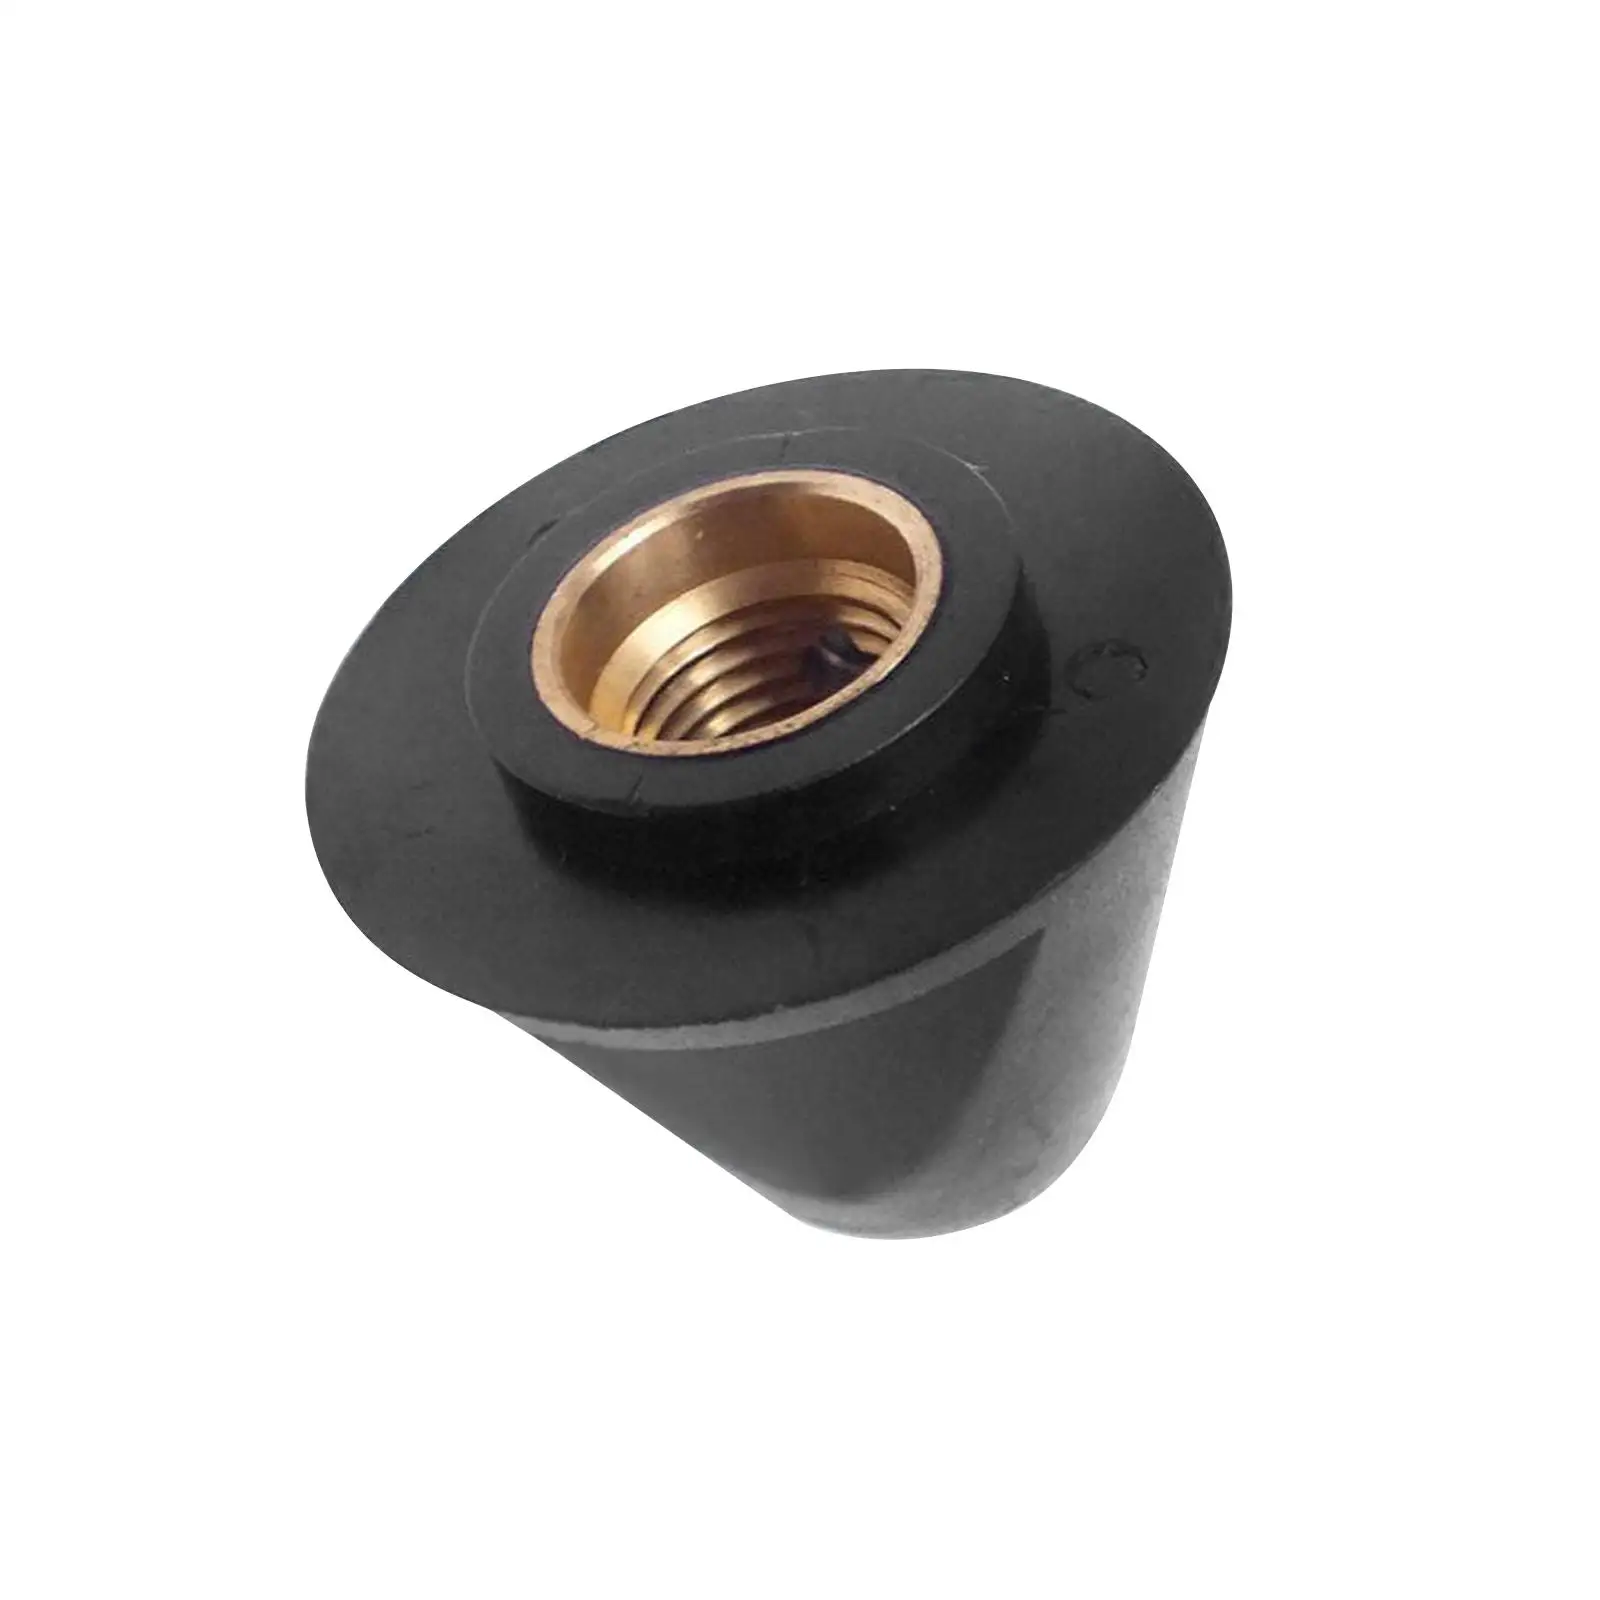 Propeller Prop Nut 647-45616-02-00 for Yamaha Outboard Engine 4HP 5HP 2 Stroke Easily to Install Engine Parts Durable